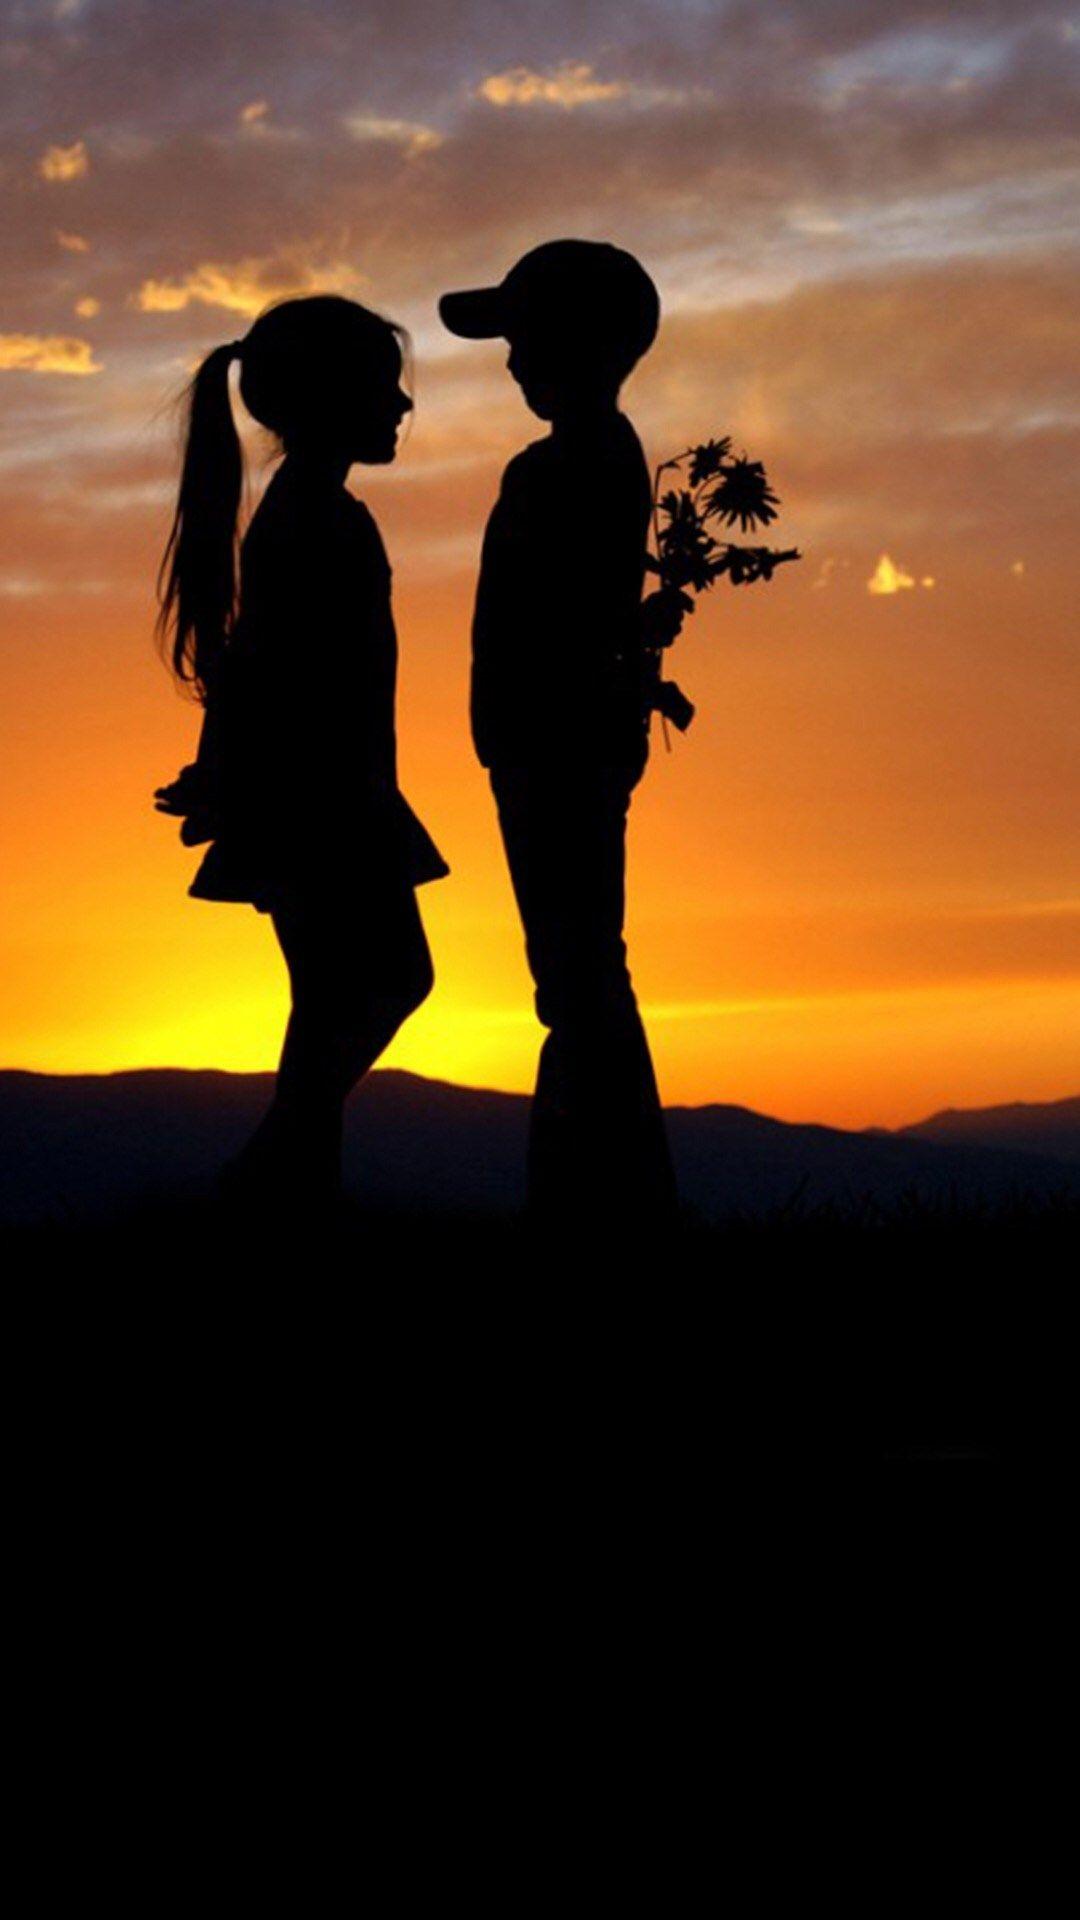 Phone Wallpapers Romantic And Love Iphone Image Hd